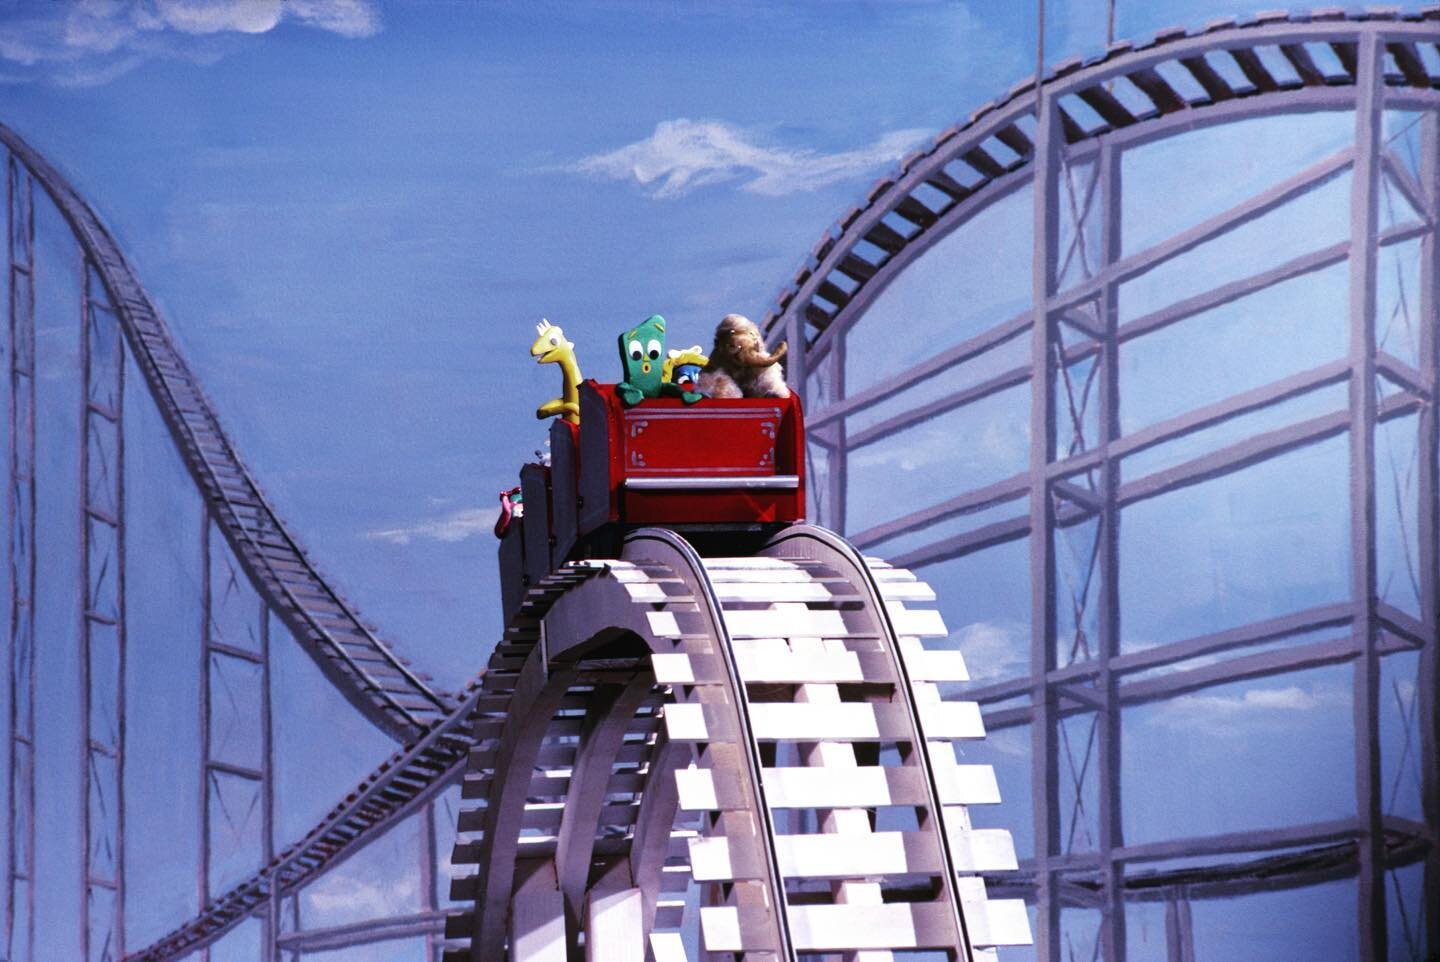 &quot;Life is like a roller coaster. It has its ups and downs... but it's your choice to either scream or enjoy the ride.&quot;

Happy April Fools&rsquo; Day.

#stage9exhibits #gumbyandpokey #animationacademy #rollercoaster #stagenineexhibits